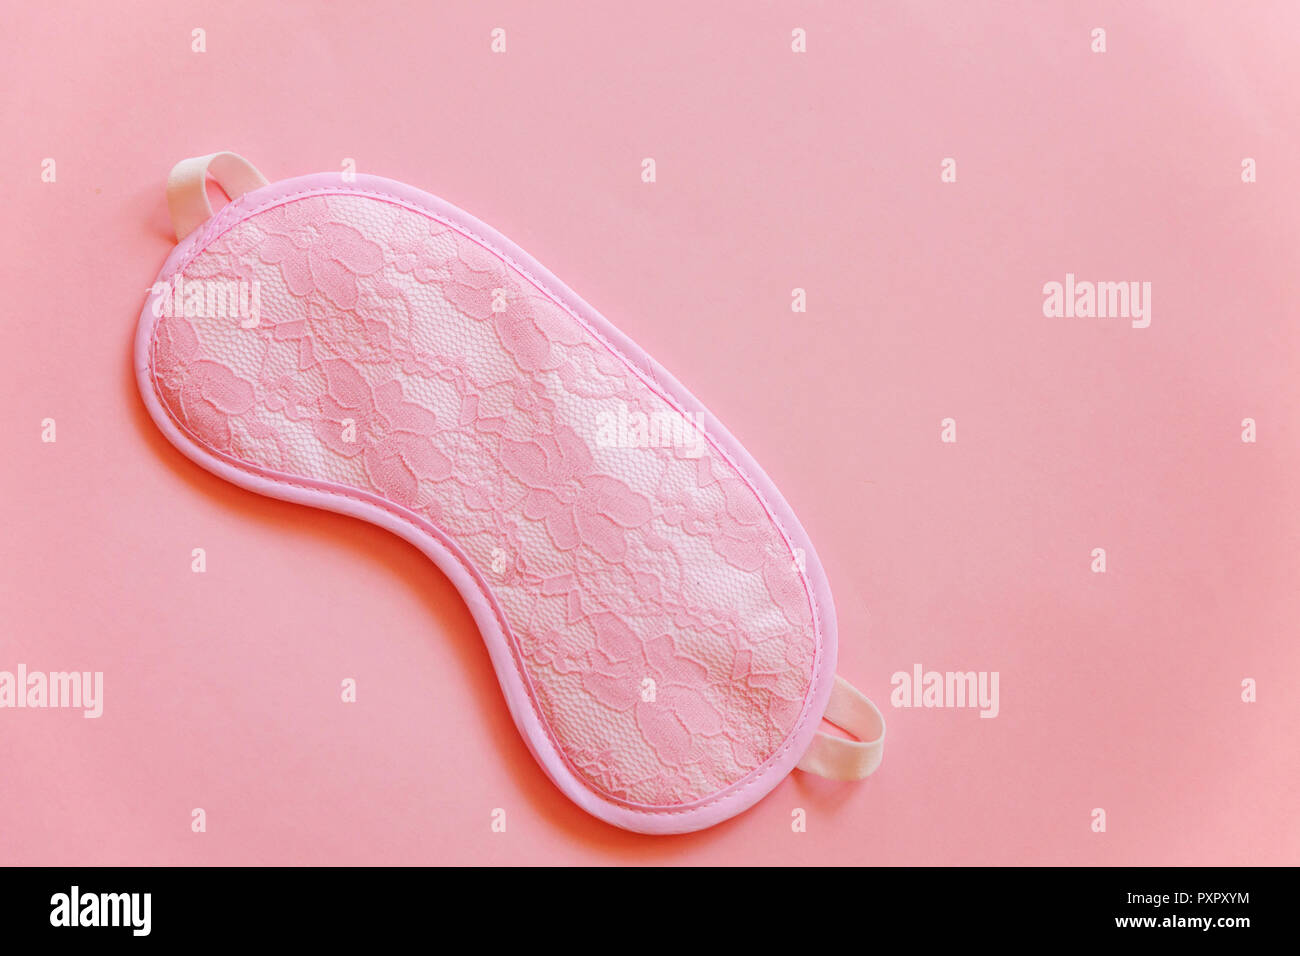 Sleeping eye mask, isolated on pink pastel colourful trendy background. Do not disturb me, let me sleep. Rest, good night, insomnia, relaxation, tired Stock Photo